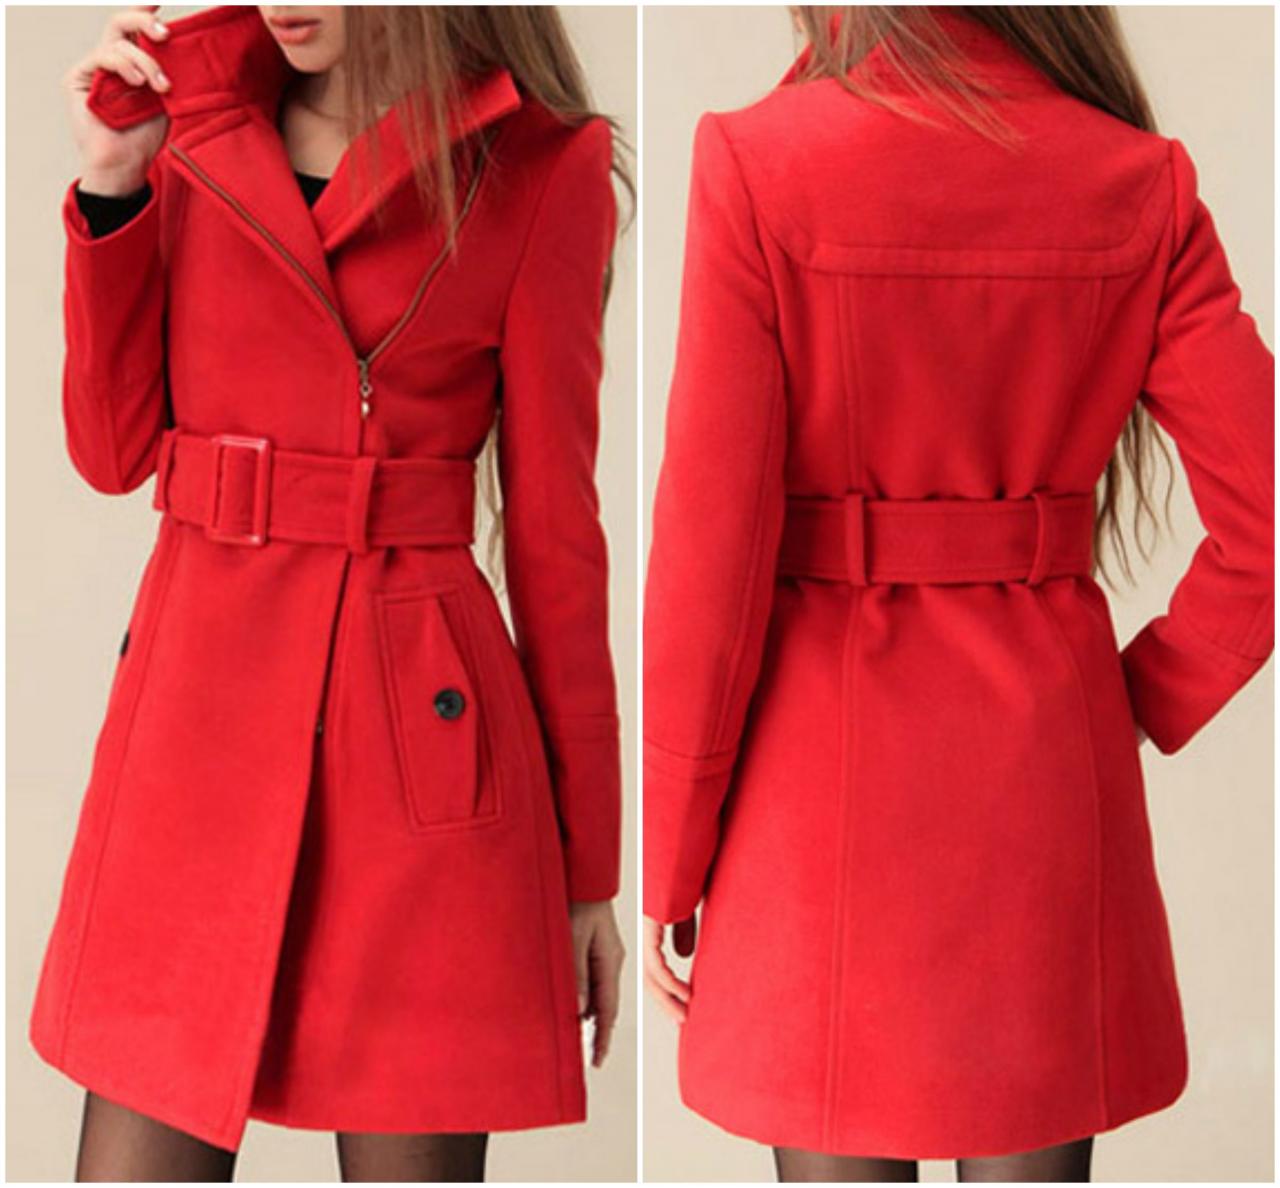 Sexy Red Winter Coat With Belt